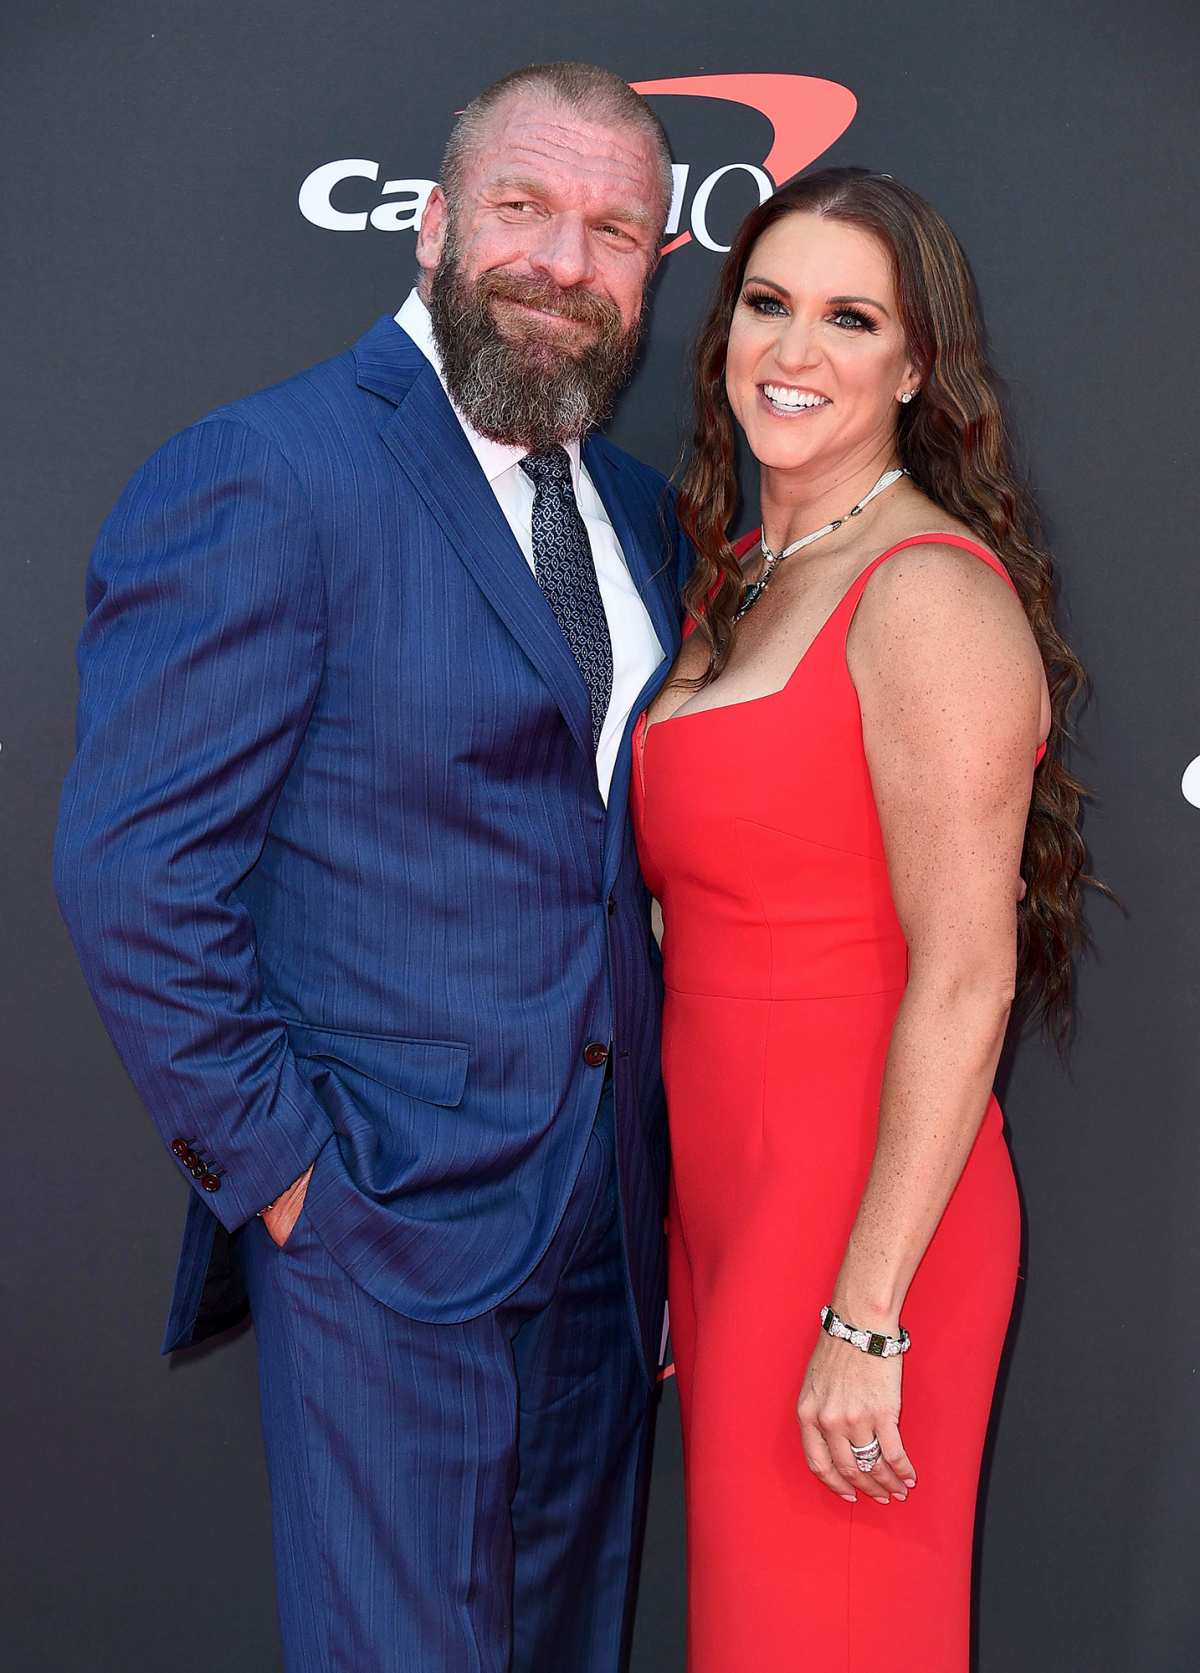 Wwe Sterphan Xxx Sex - WWE Executive Stephanie McMahon Announces 'Leave of Absence'